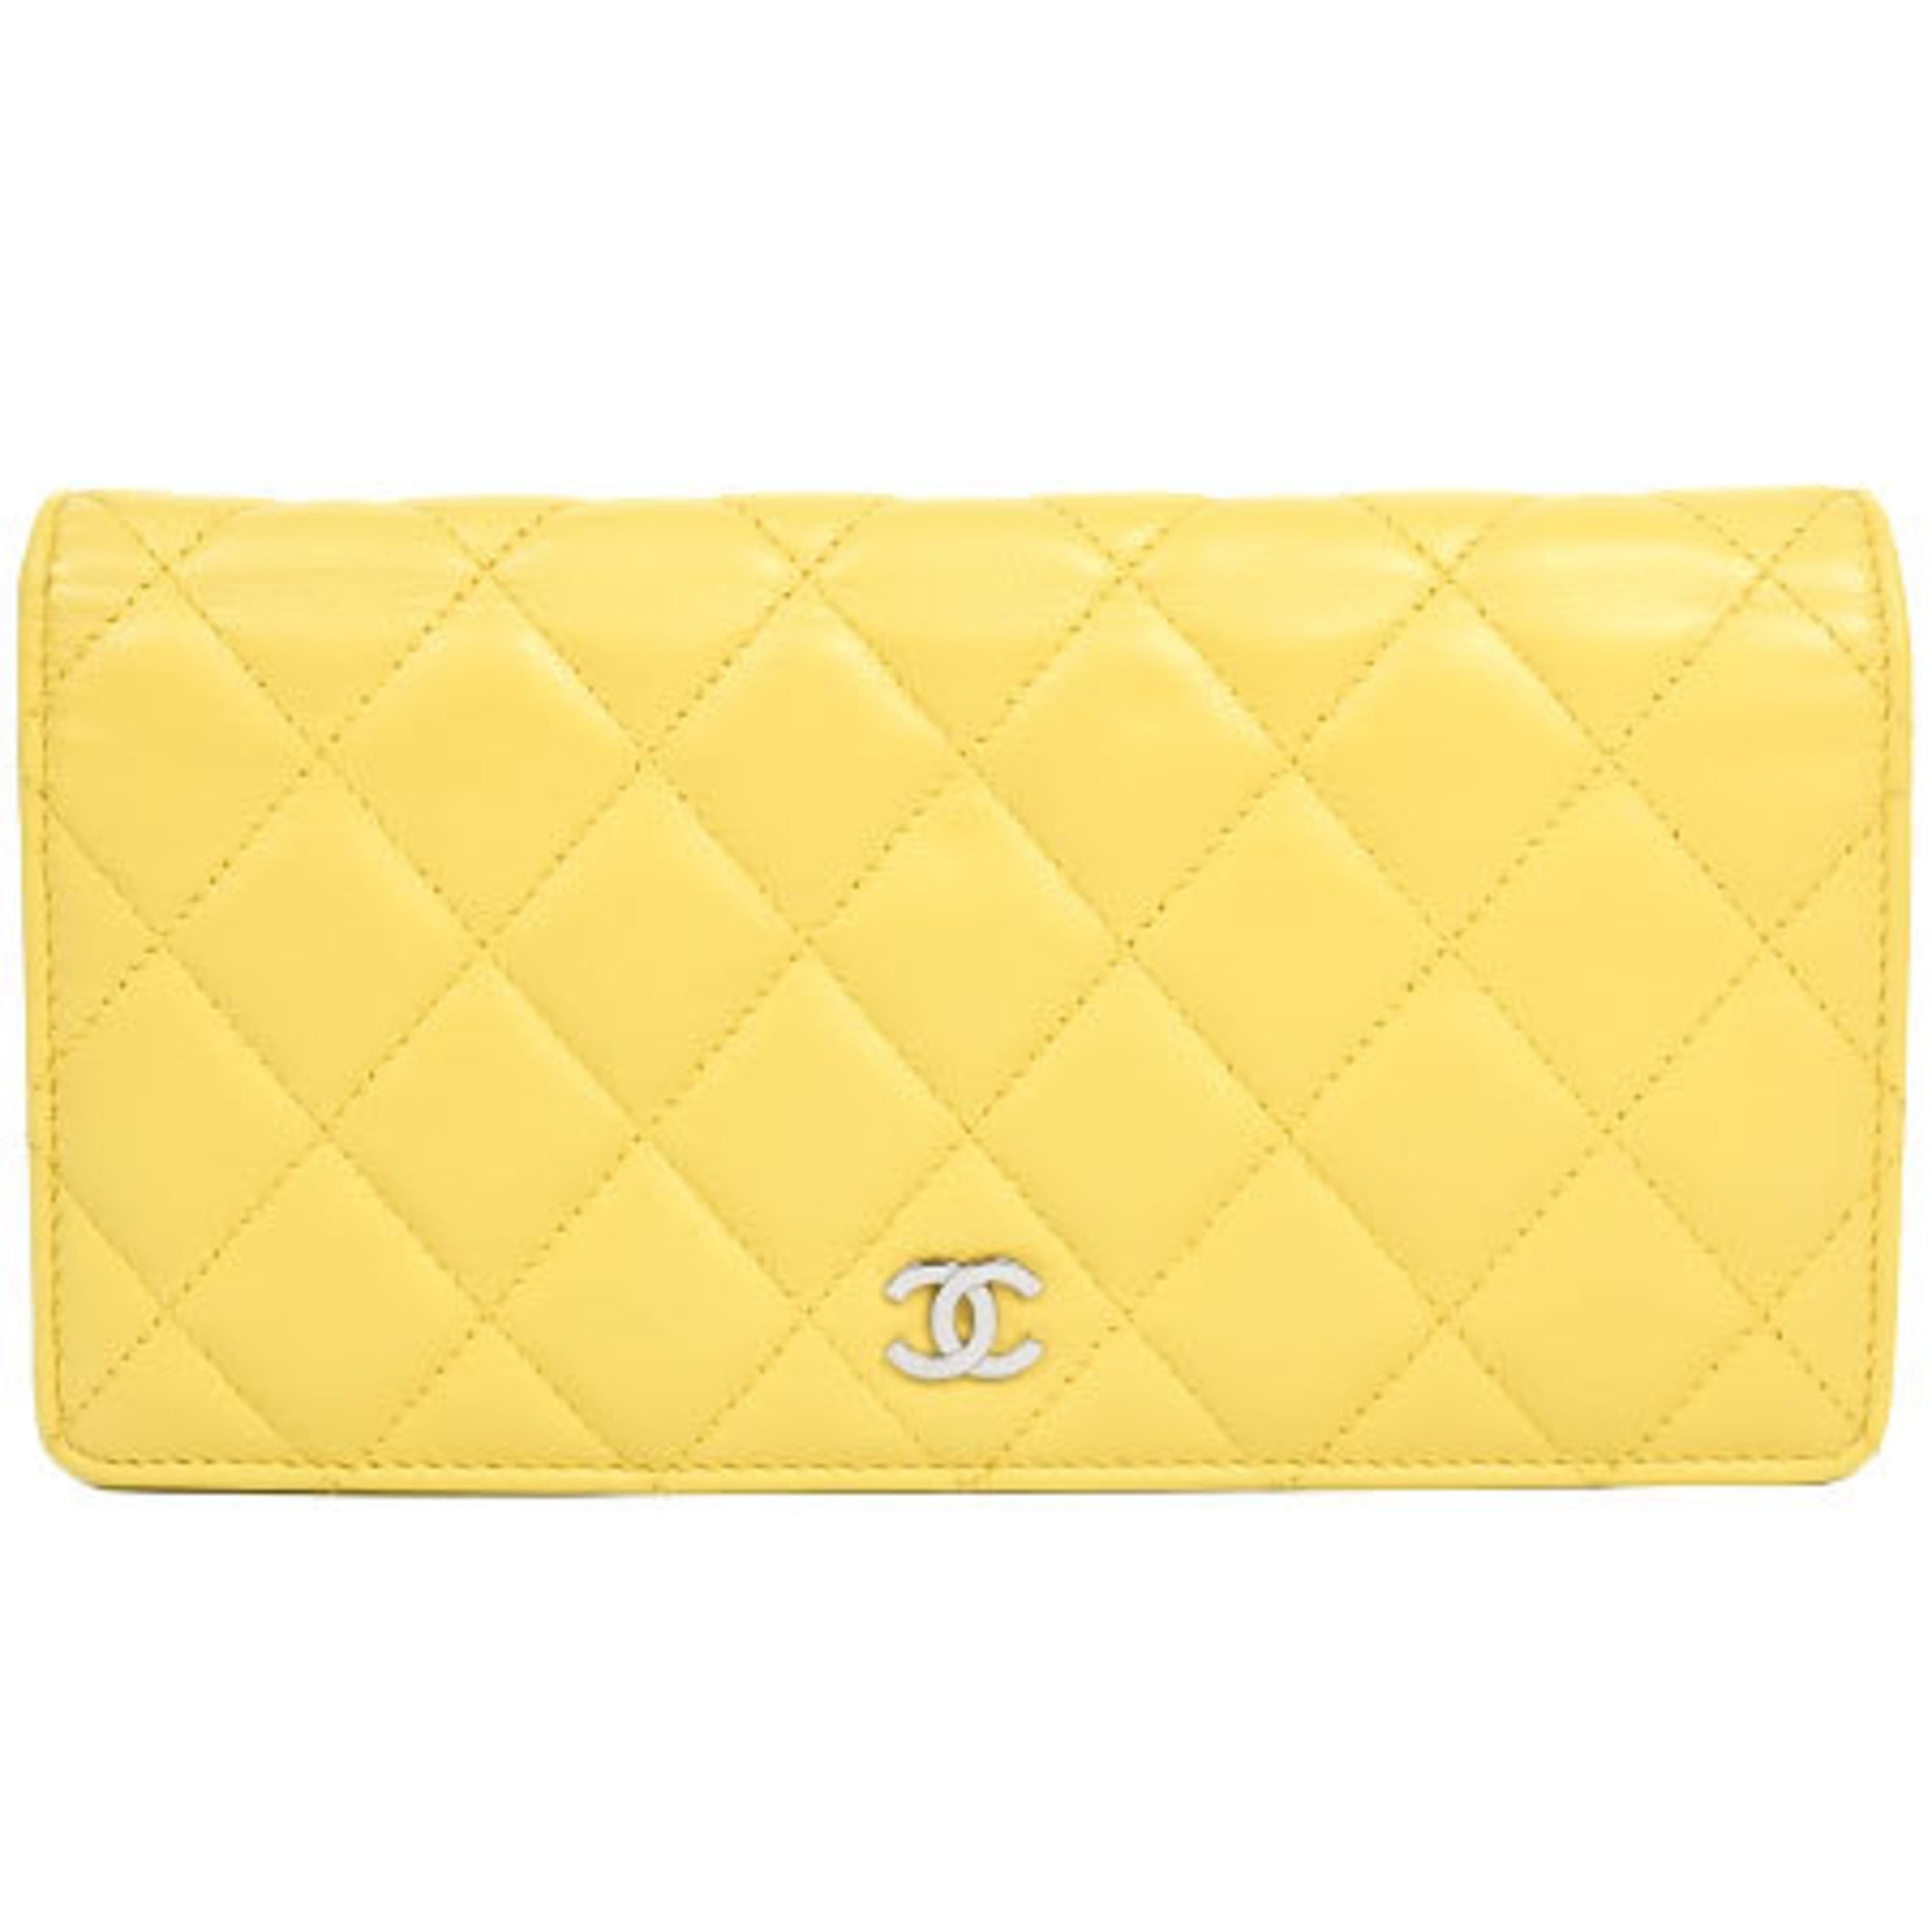 Chanel Timeless/Classique Long-zipped Wallet Review 